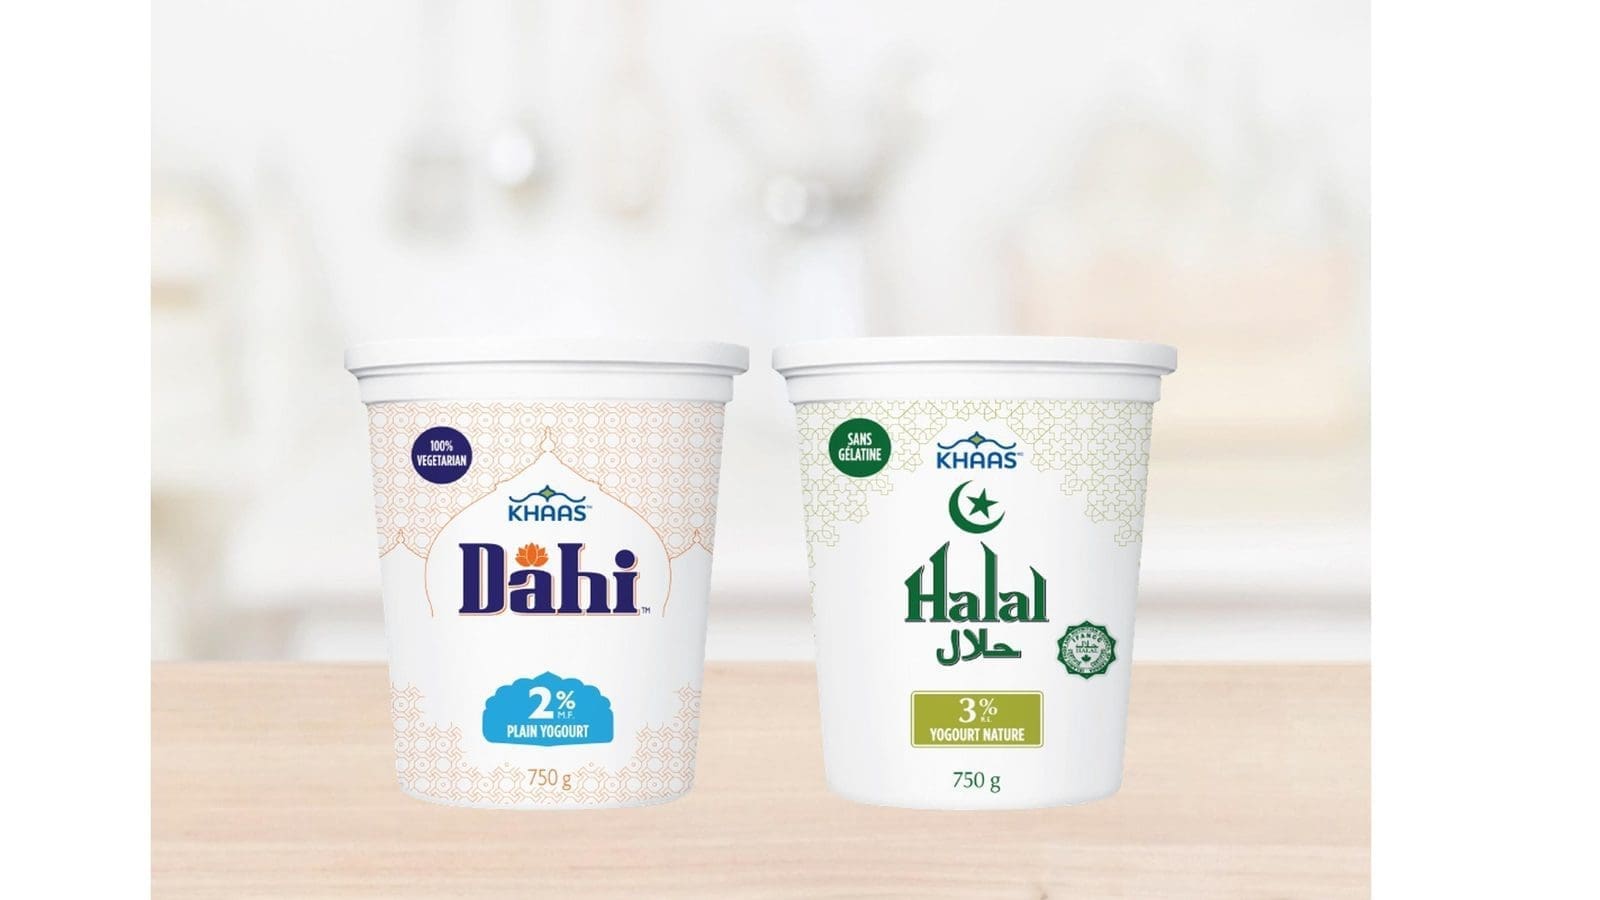 Lactalis Canada becomes Canada’s dairy leader in ethnic yogurt after the addition of Khaas brands